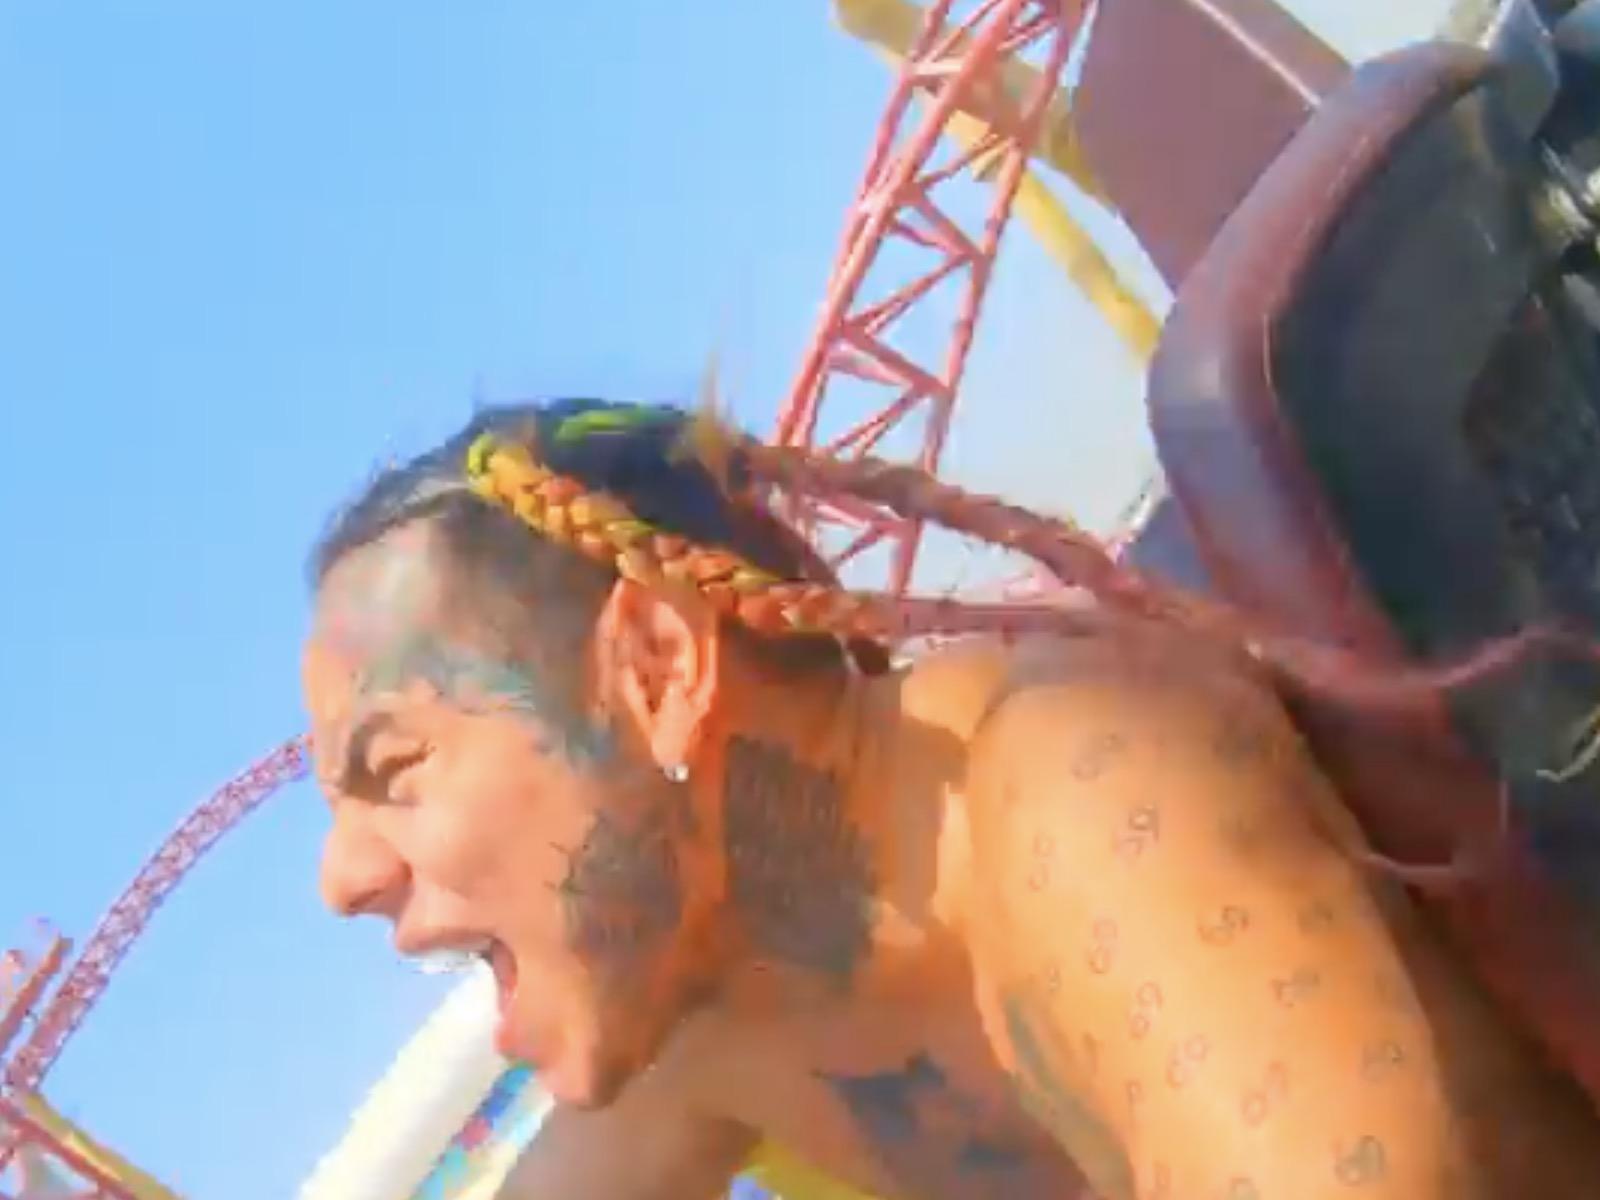 Tekashi 6ix9ine Takes Over An Abandoned Theme Park In New Stoopid